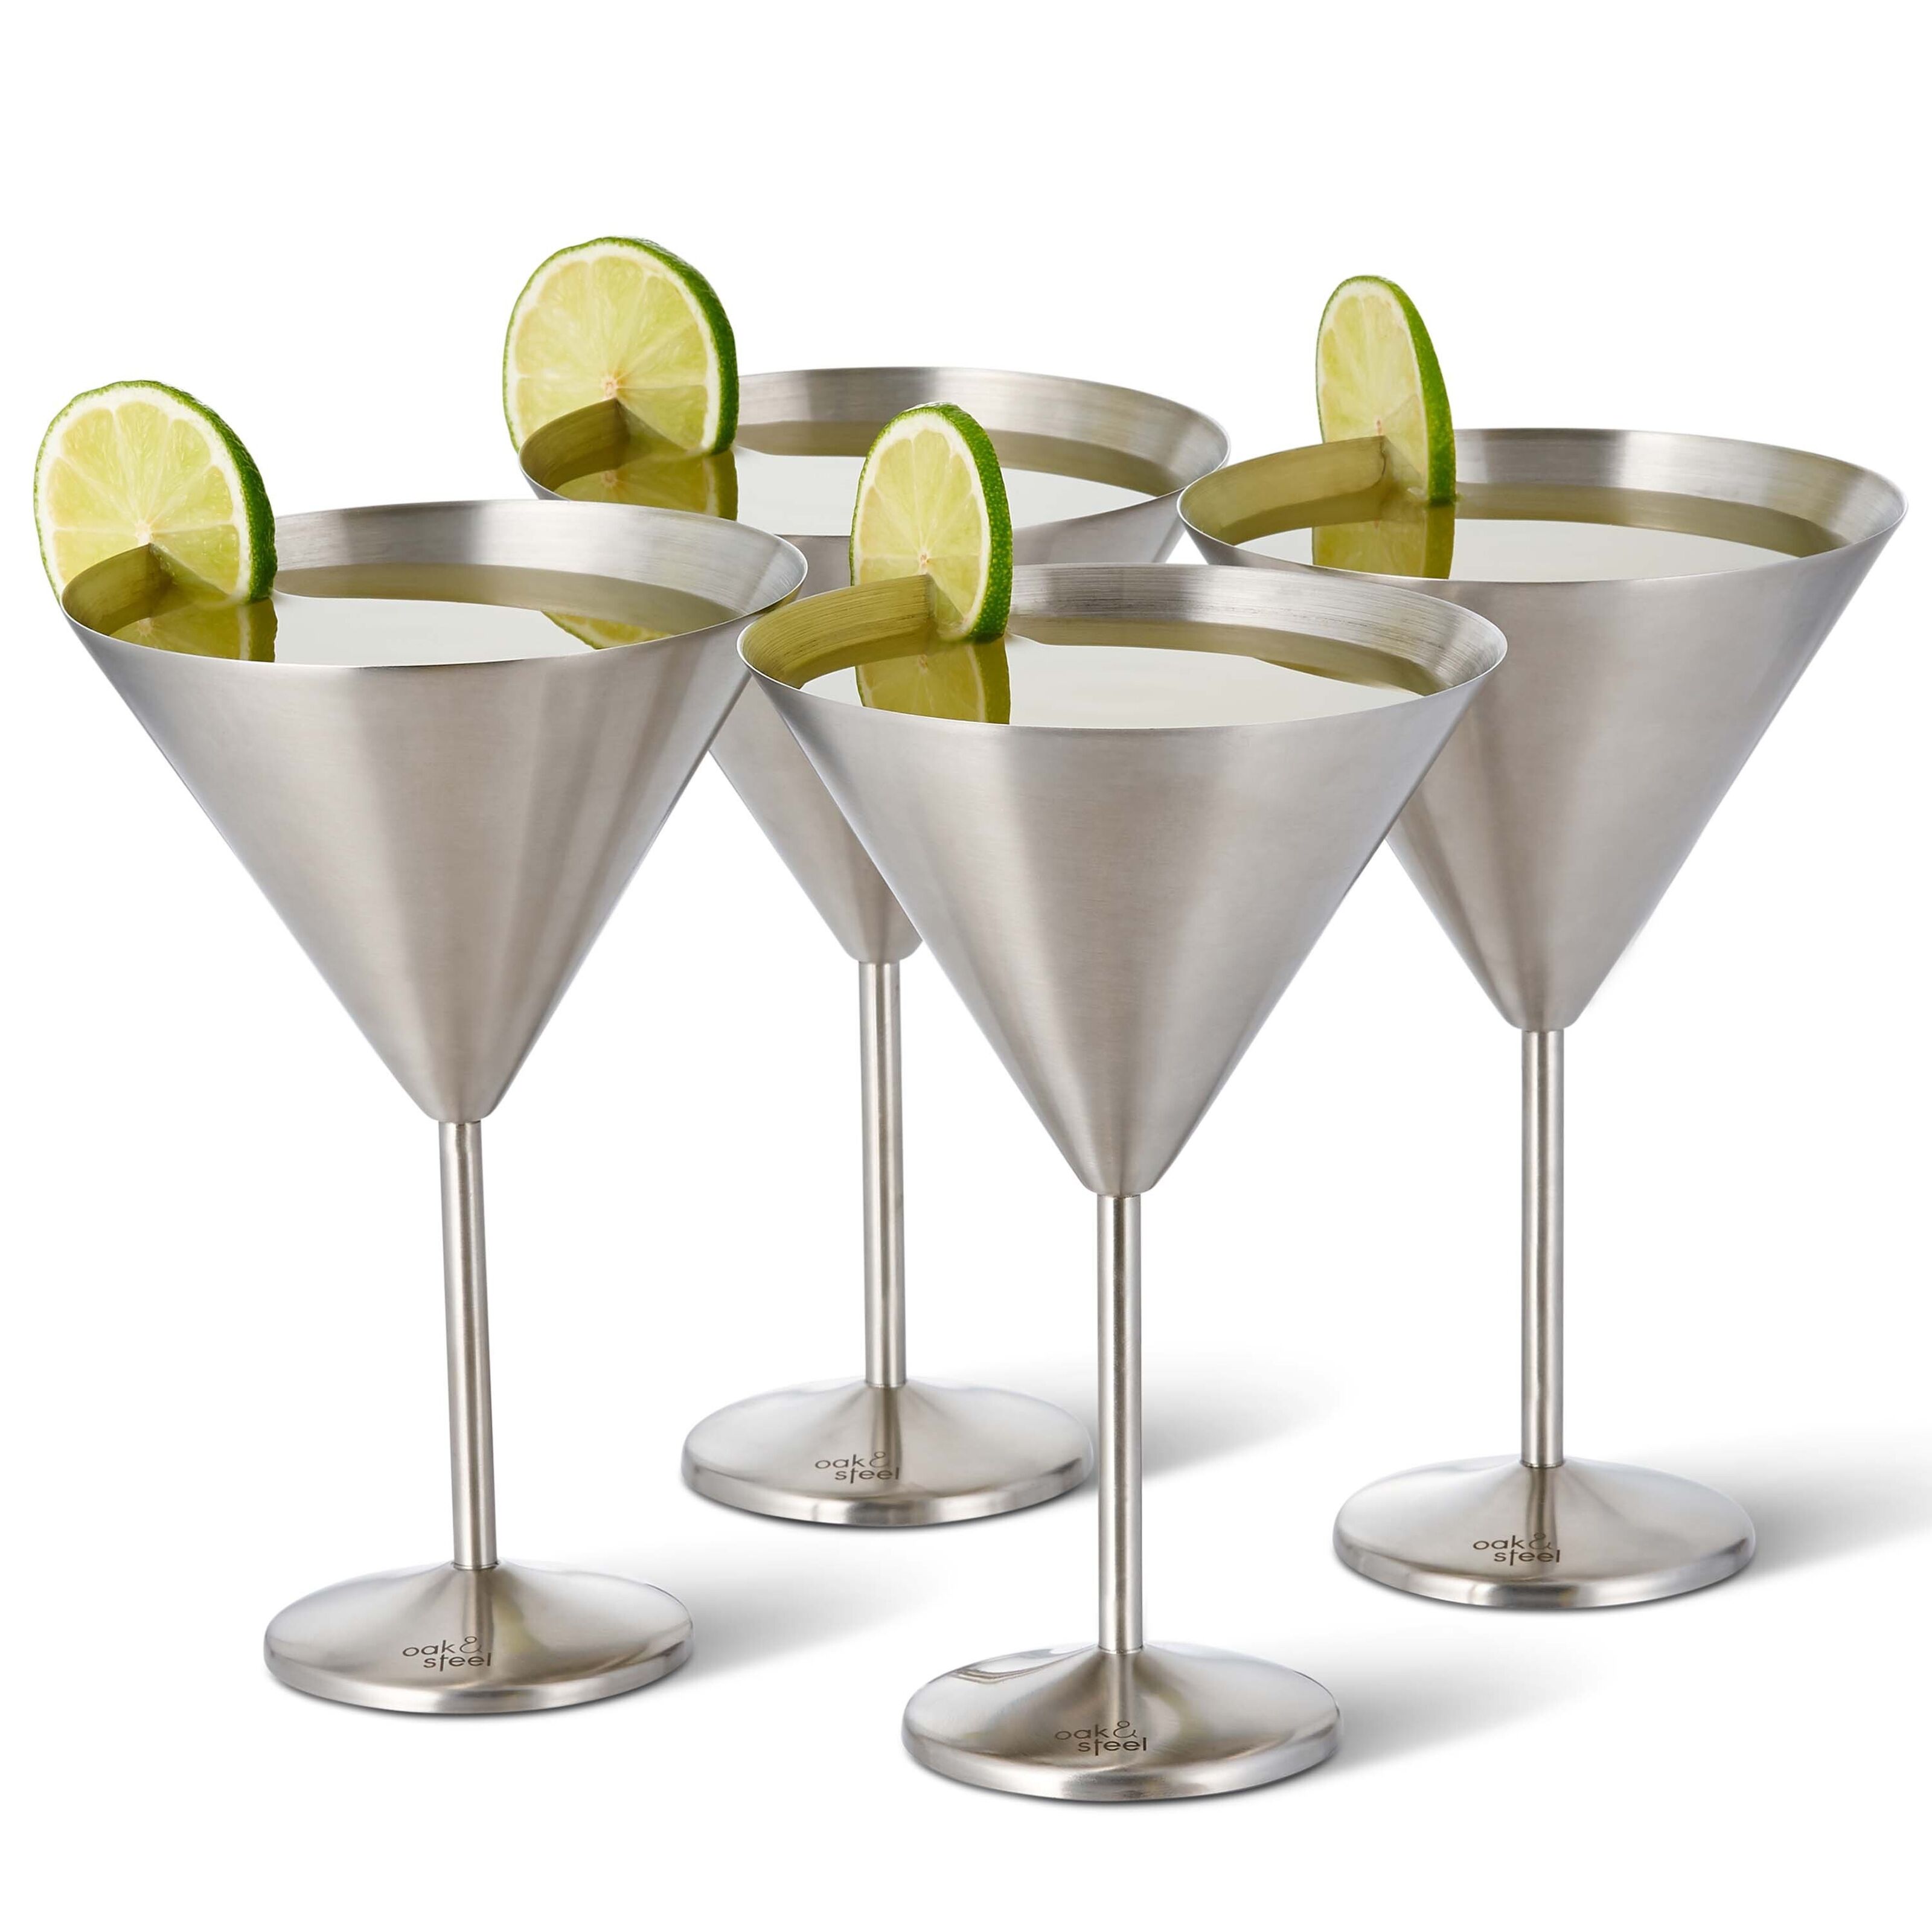 Martini Glass, Insulated Stainless Steel Margarita Glass with Lid, Set of 2